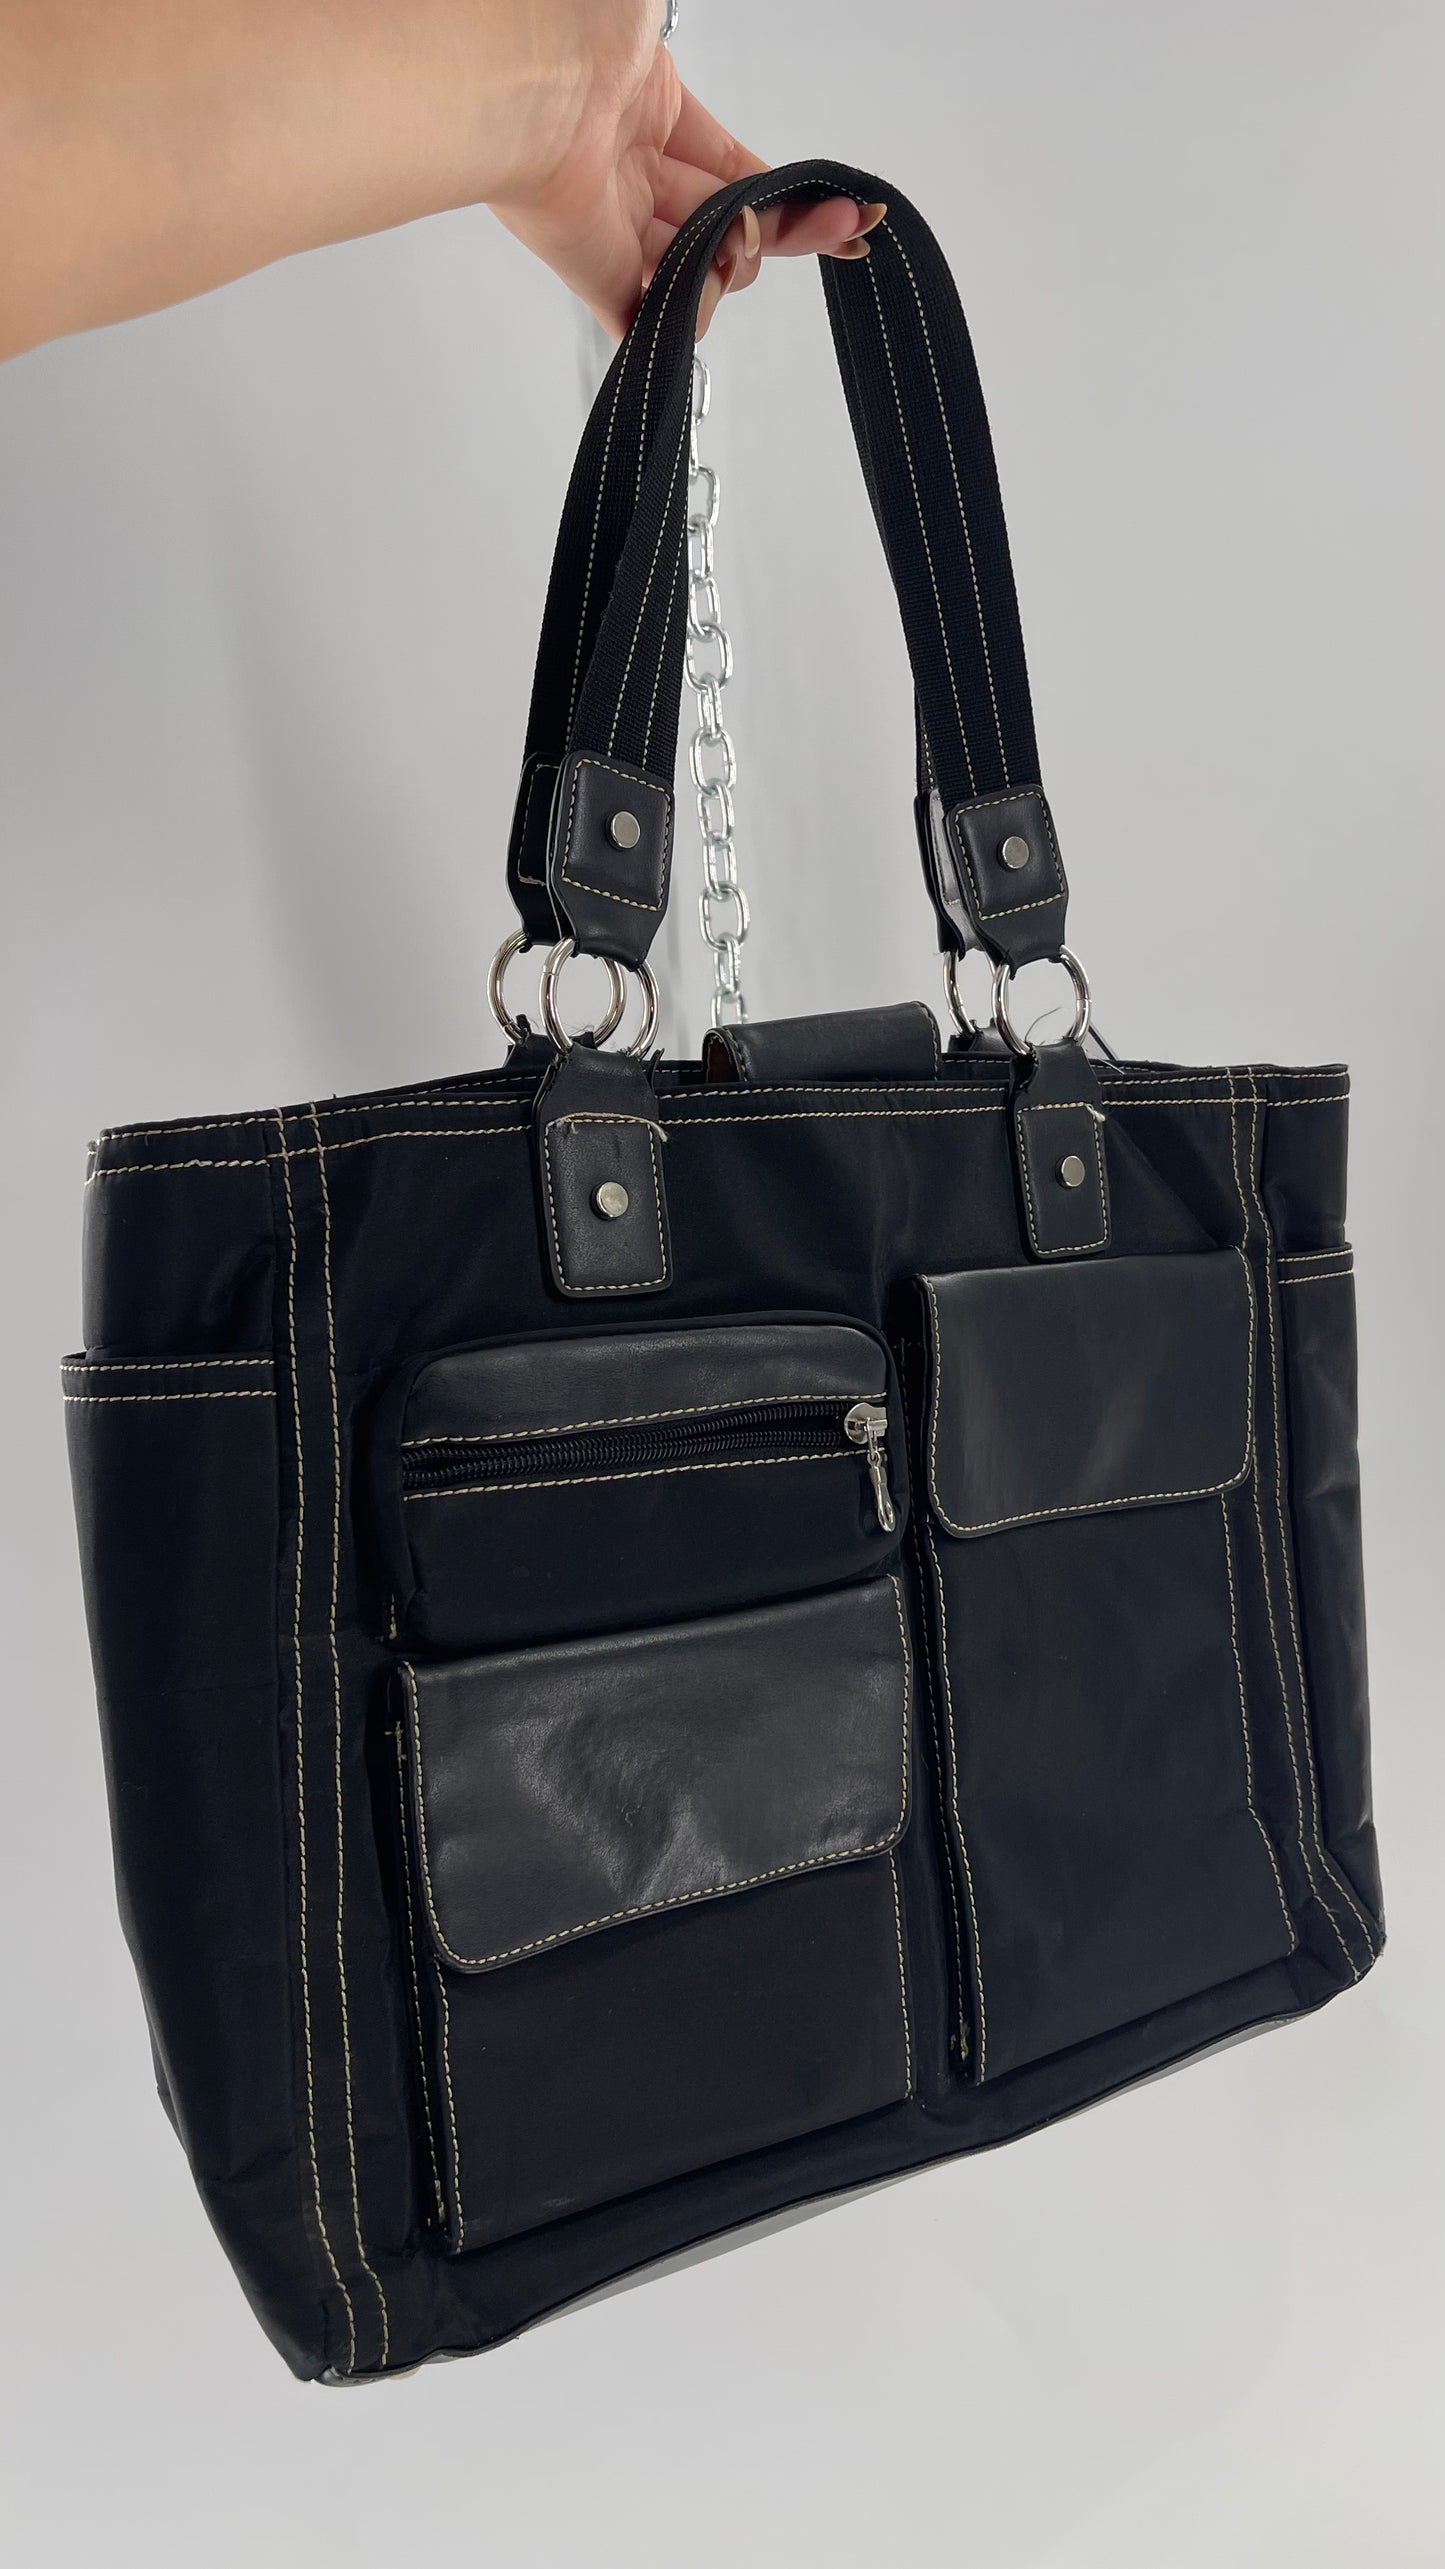 Vintage Oversized Black Exaggerated Pocket Tote Bag with Contrast Stitching